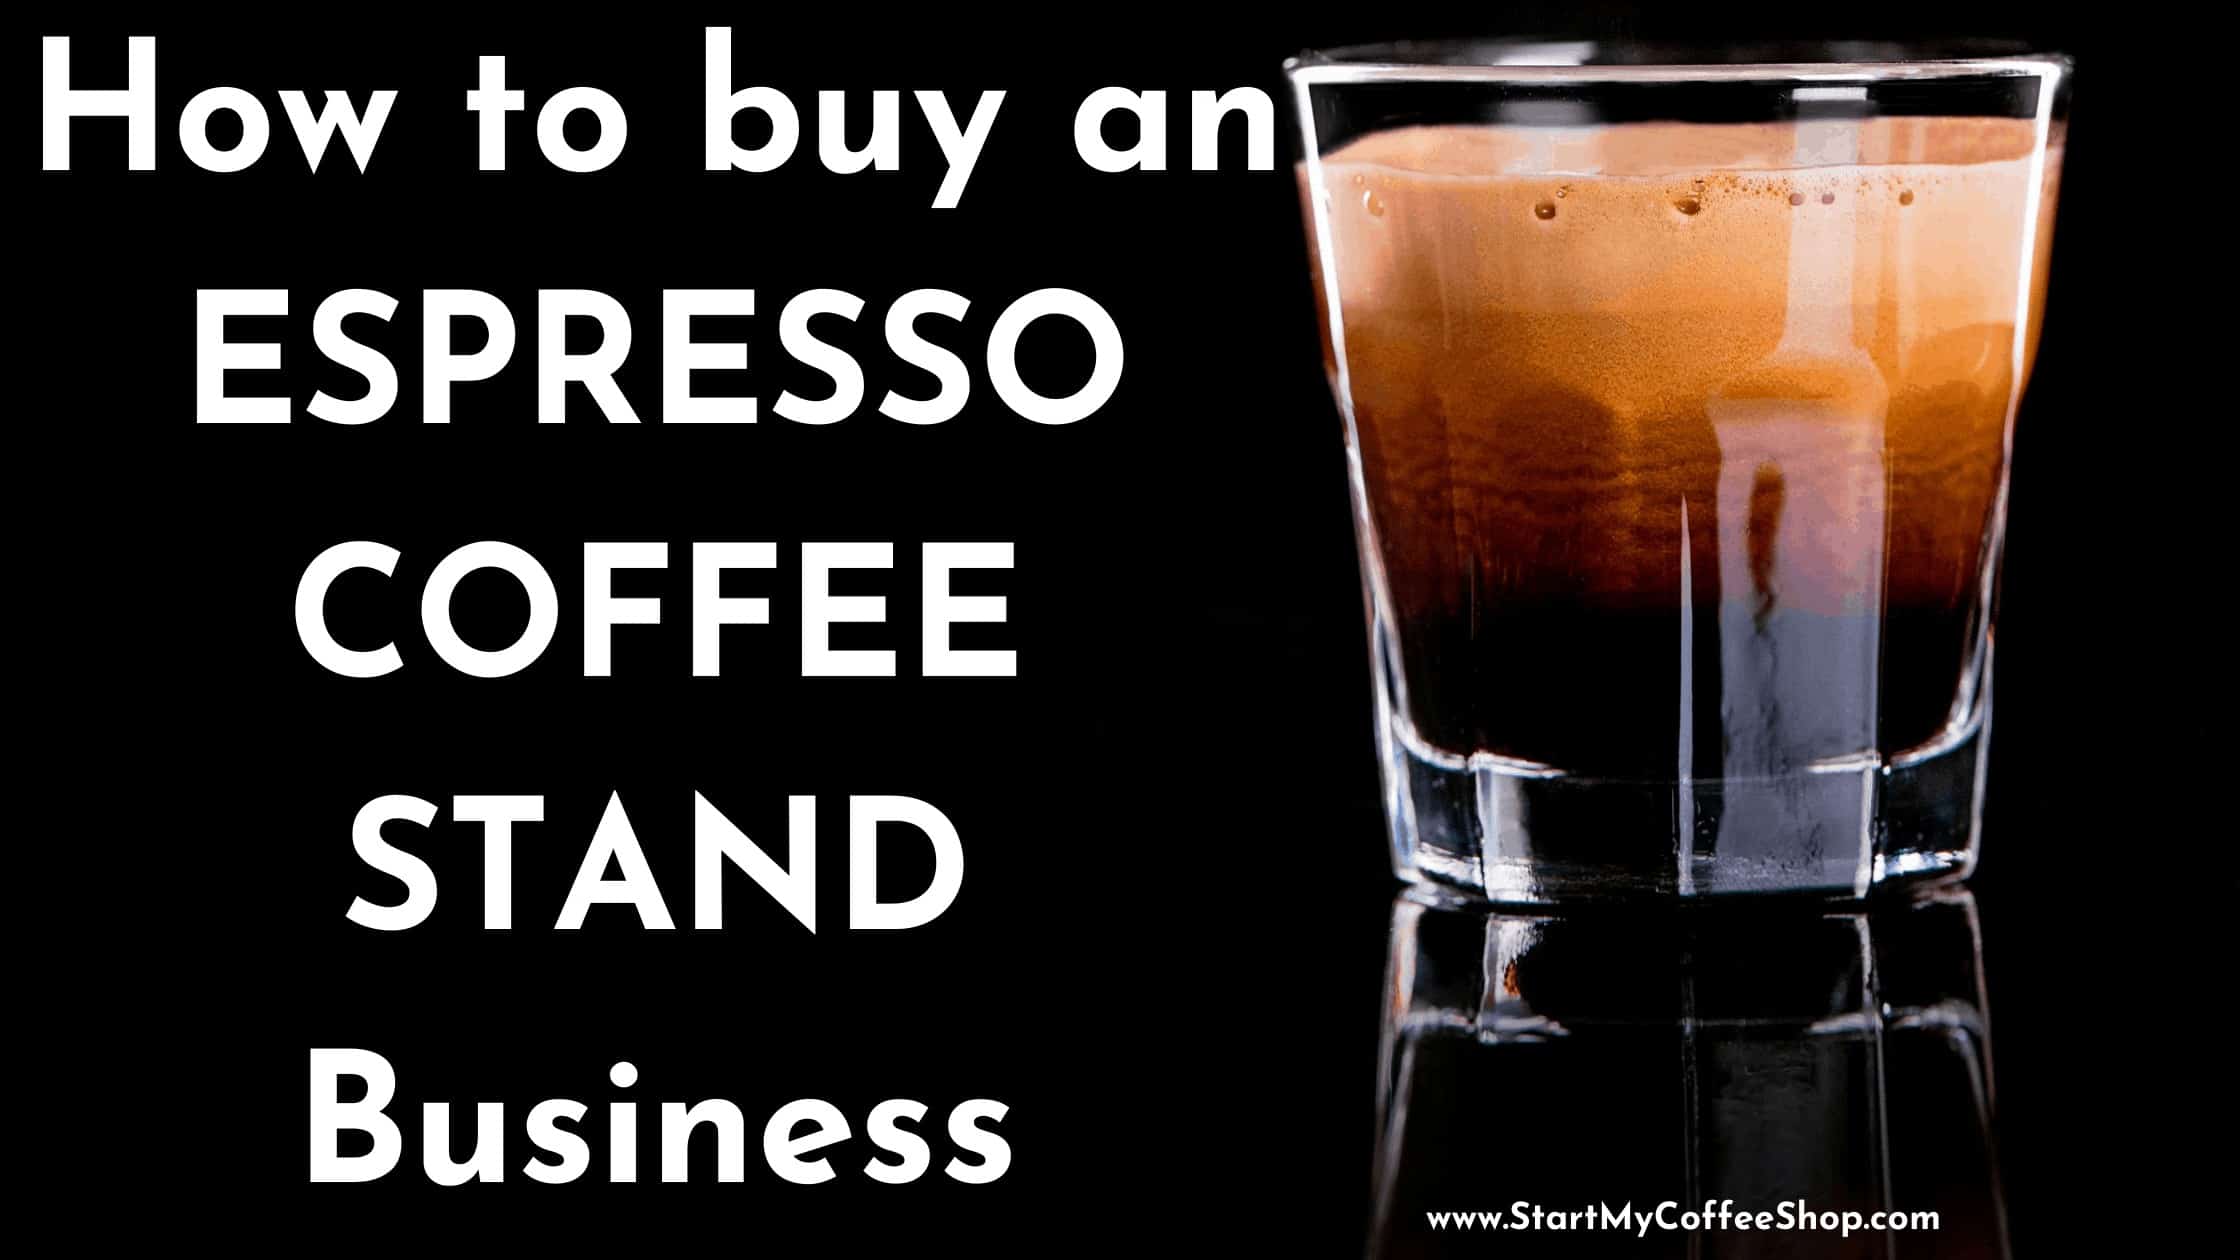 How to Buy an Espresso Coffee Stand Business